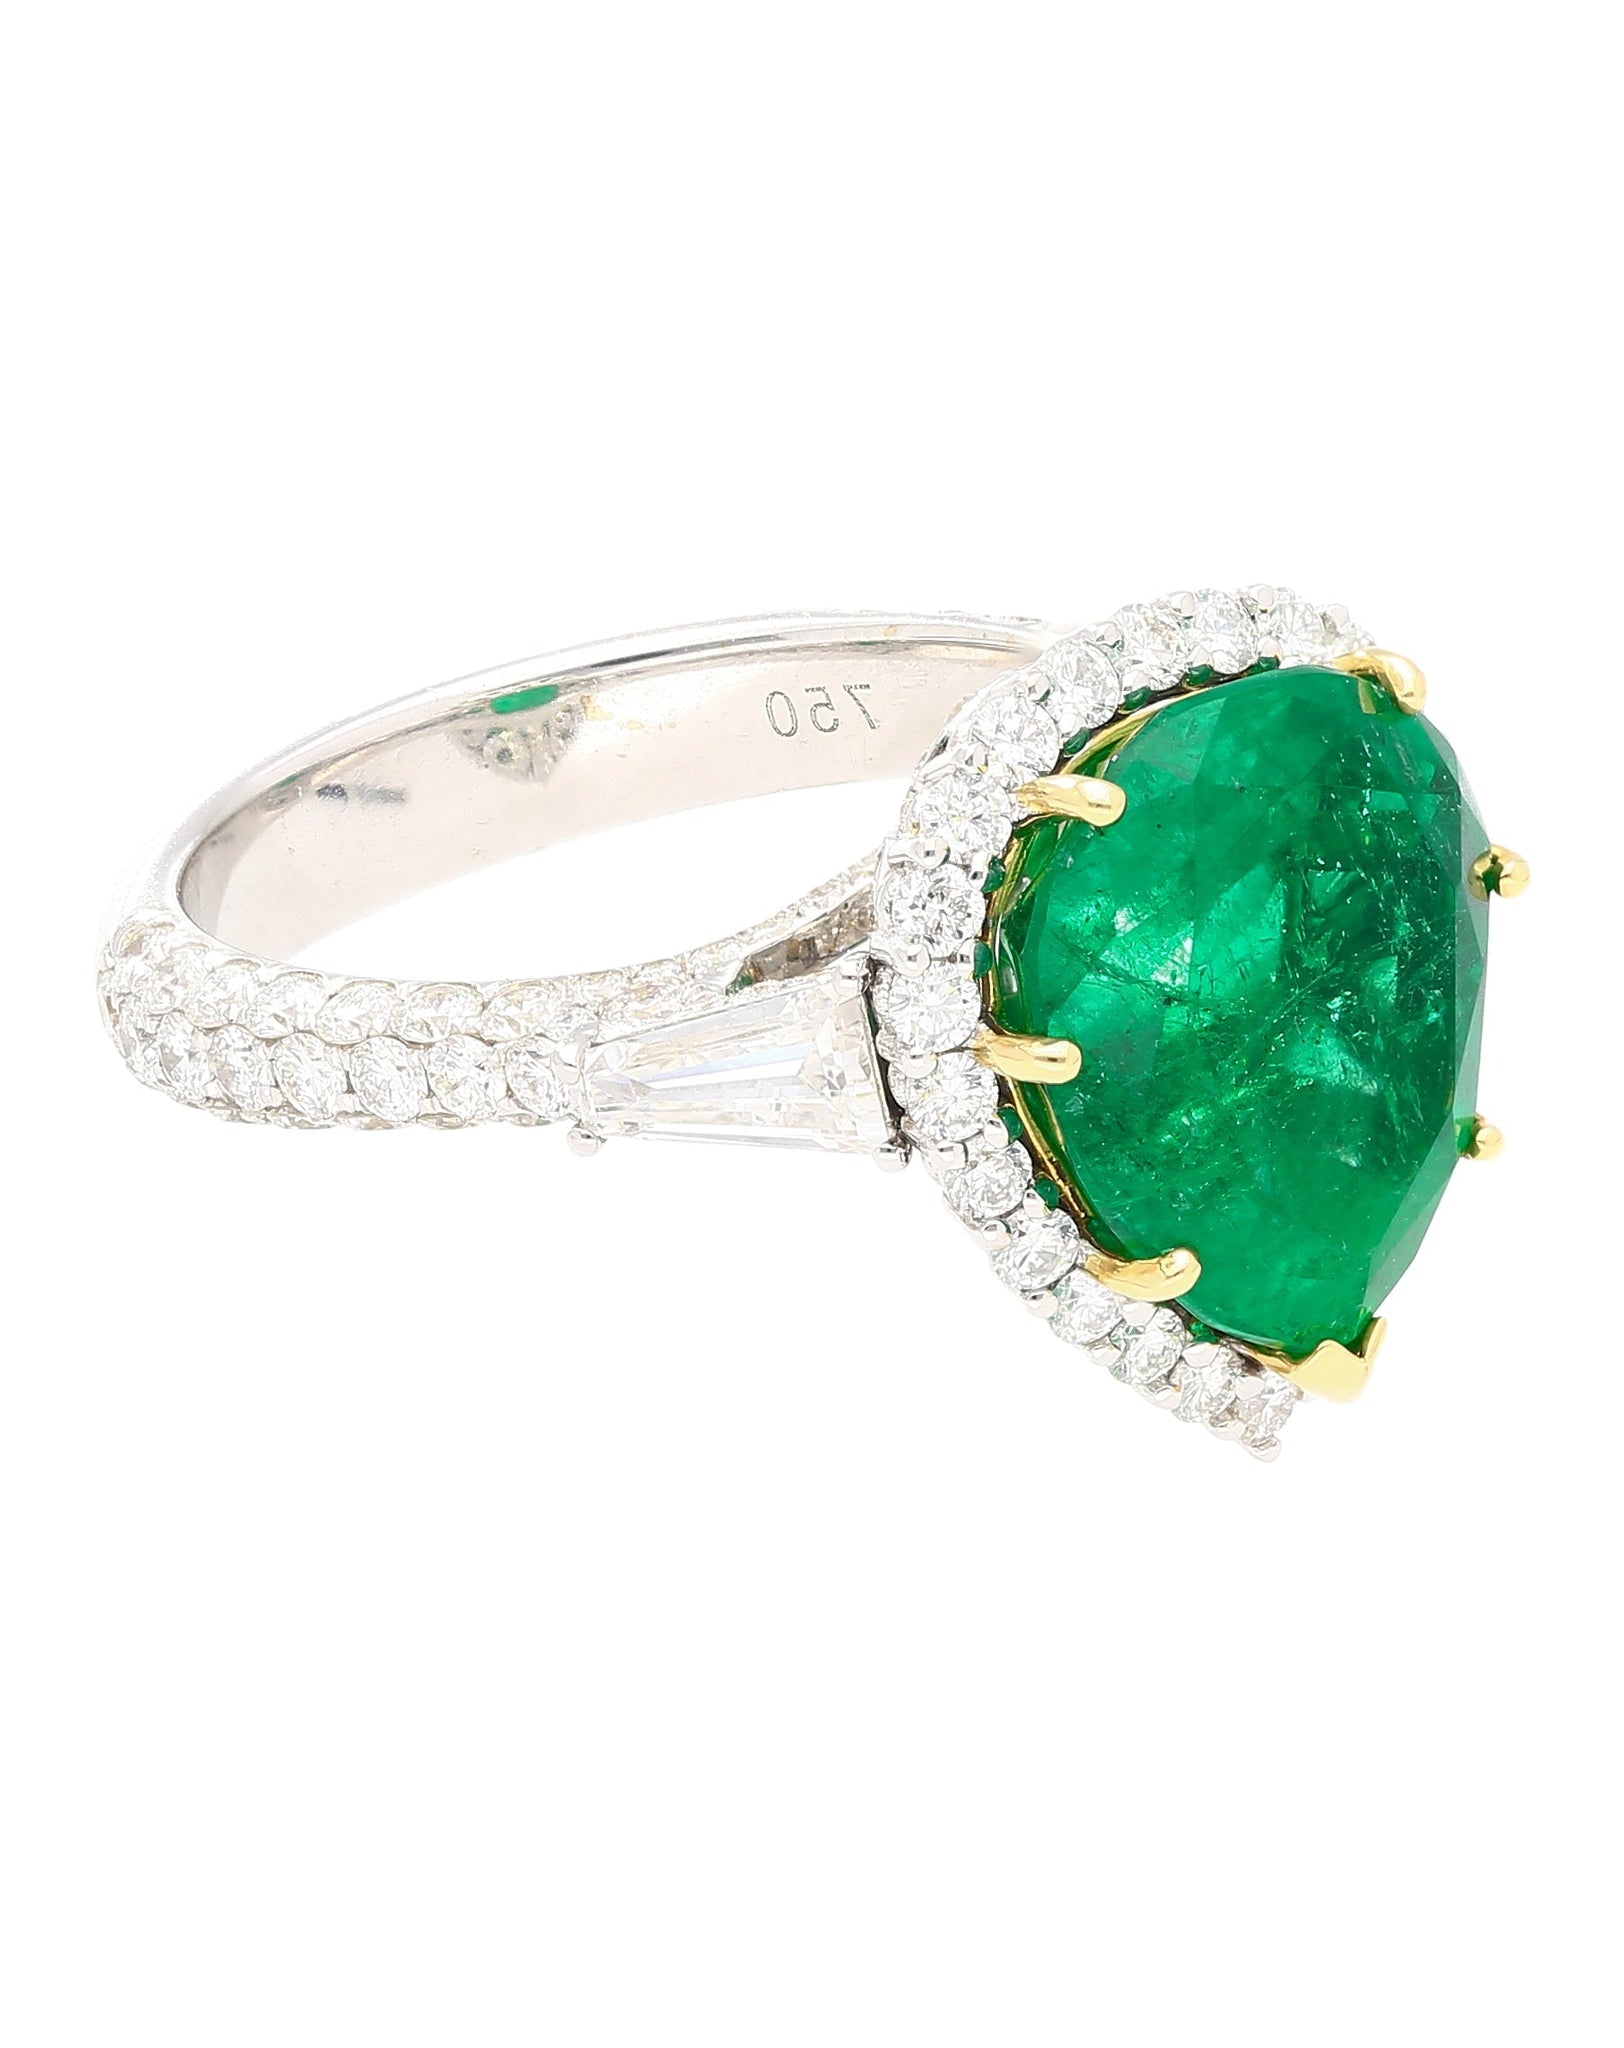 5.12 Carat Pear Cut Colombian Emerald Ring with Baguette Diamond Sides in 18K Gold